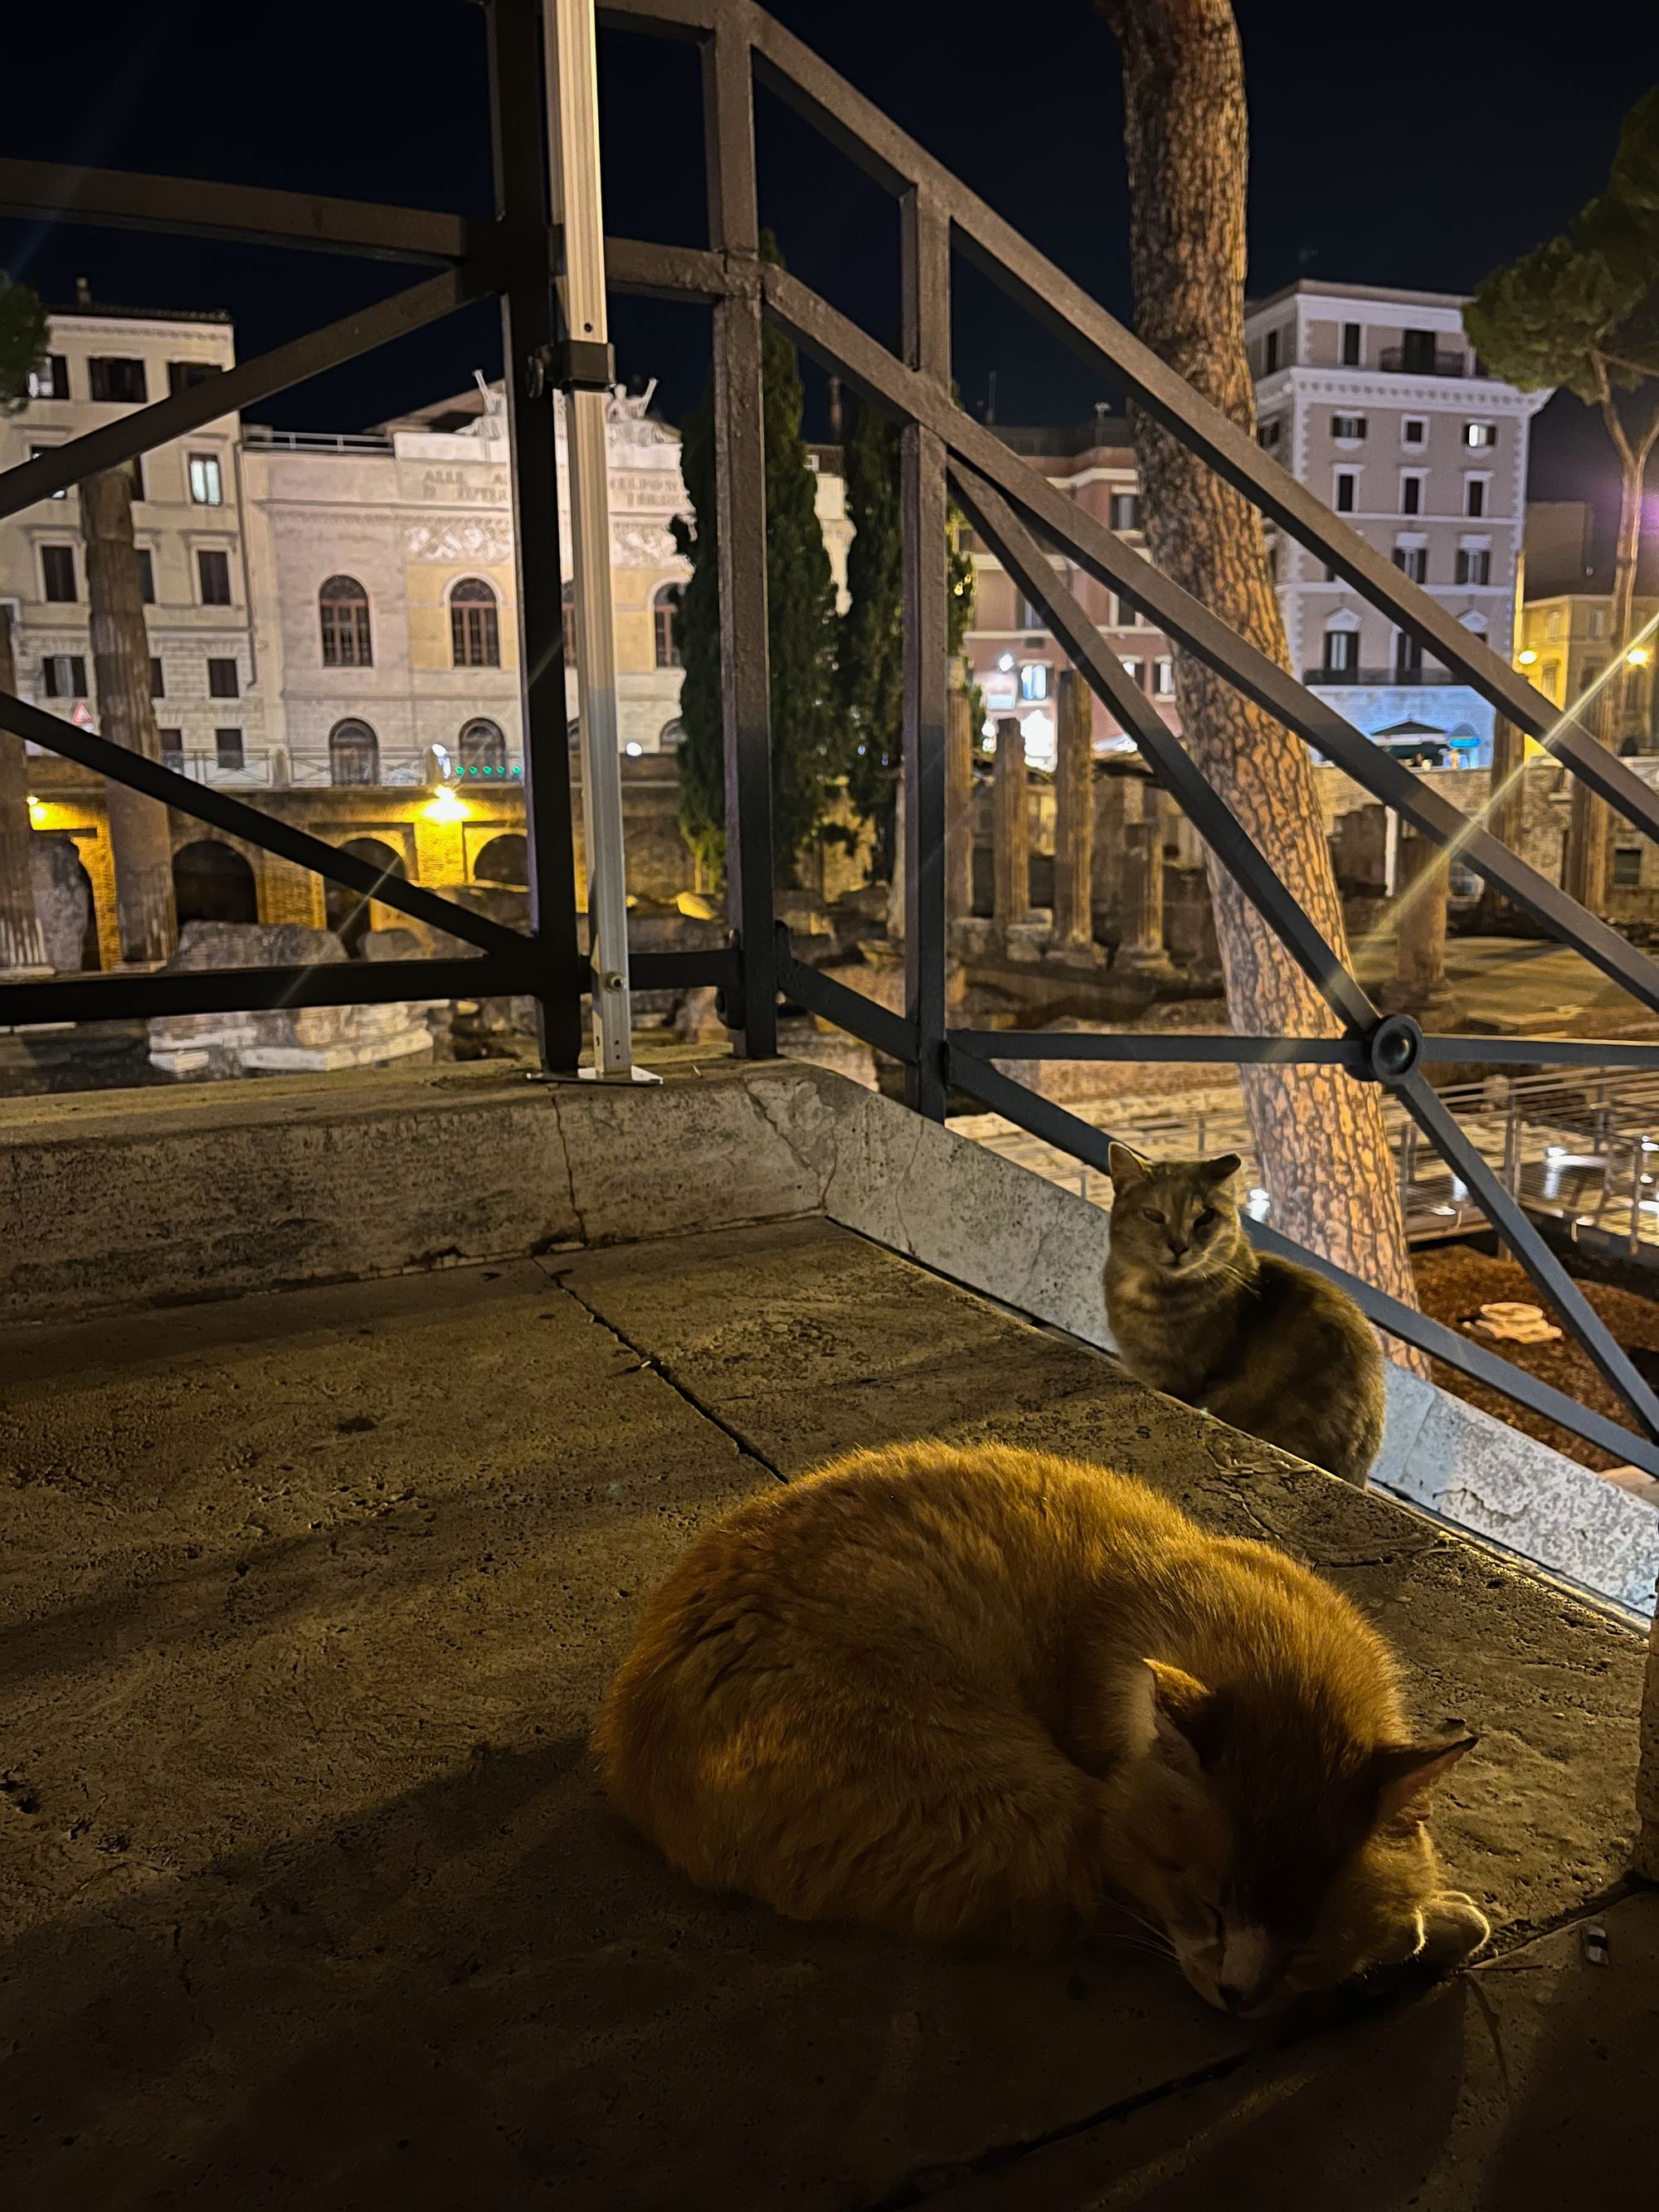 A calico cat sleeps in the foreground, another cat is sitting down a step behind it, and behind them and a rail is a archaeological site with trees and columns. Further back, buildings.